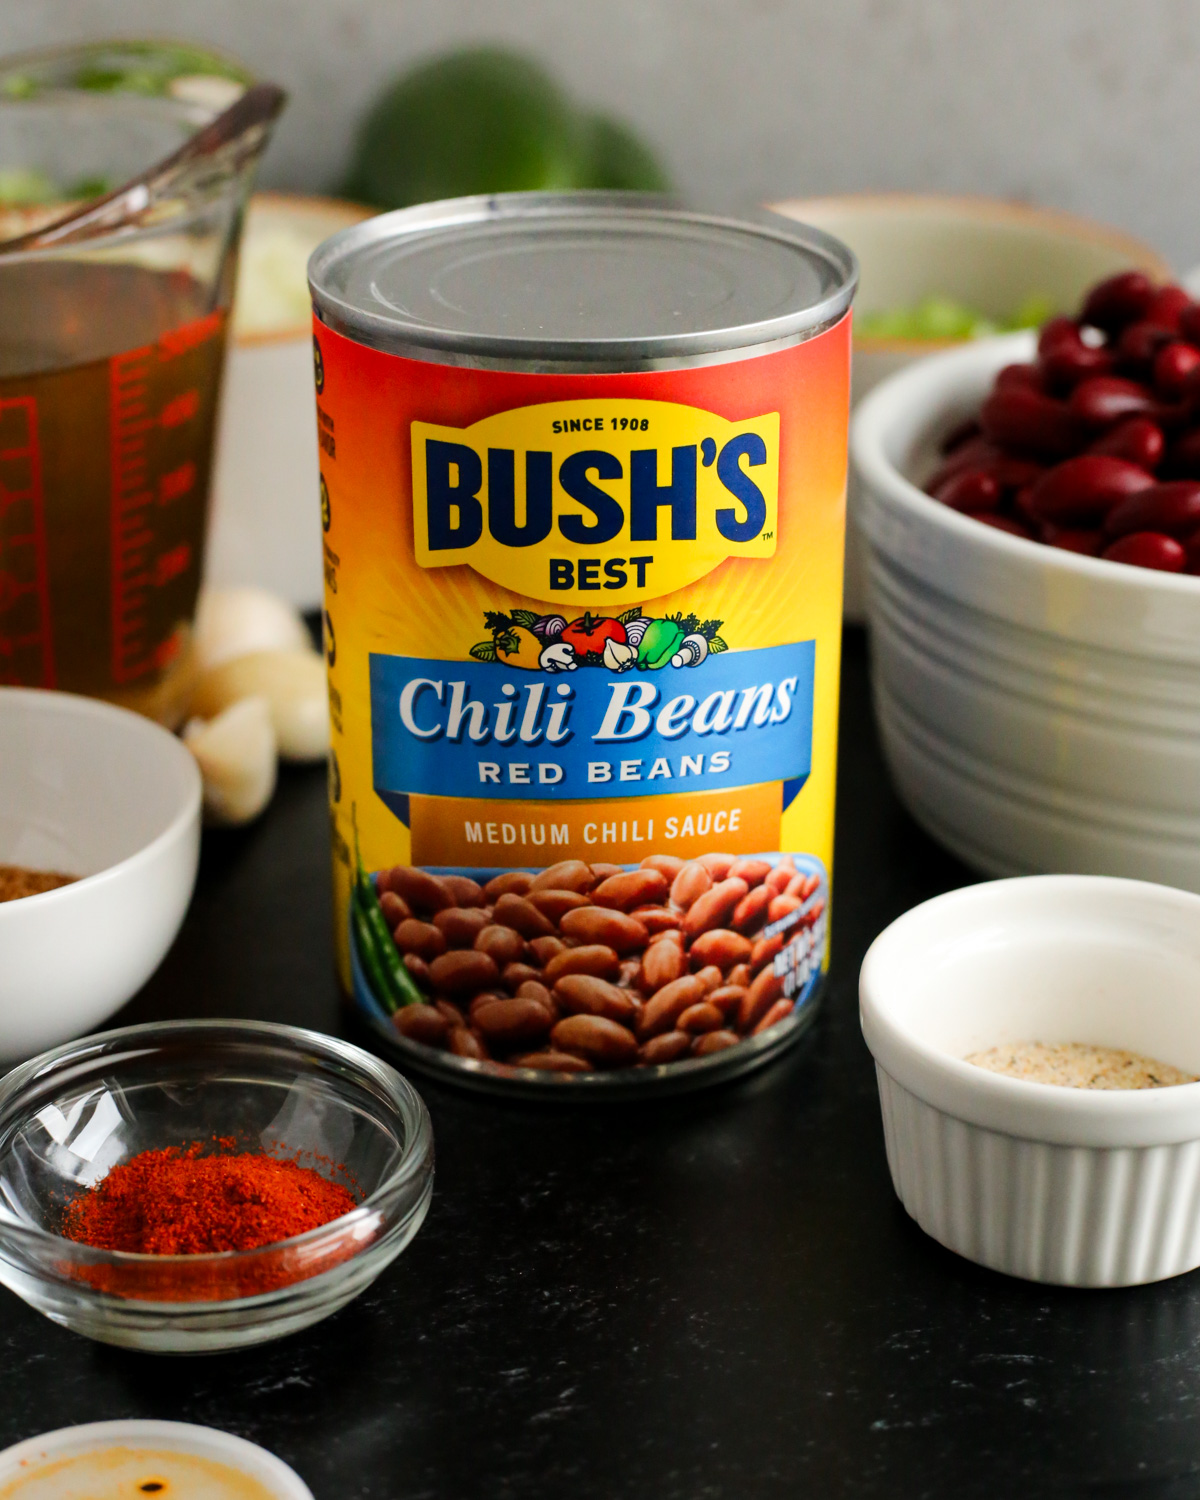 A can of Bush's Best Chili  Beans (red beans in a medium chili sauce) displayed on a dark countertop with various other chili seasonings and ramekins or prep bowls in the background